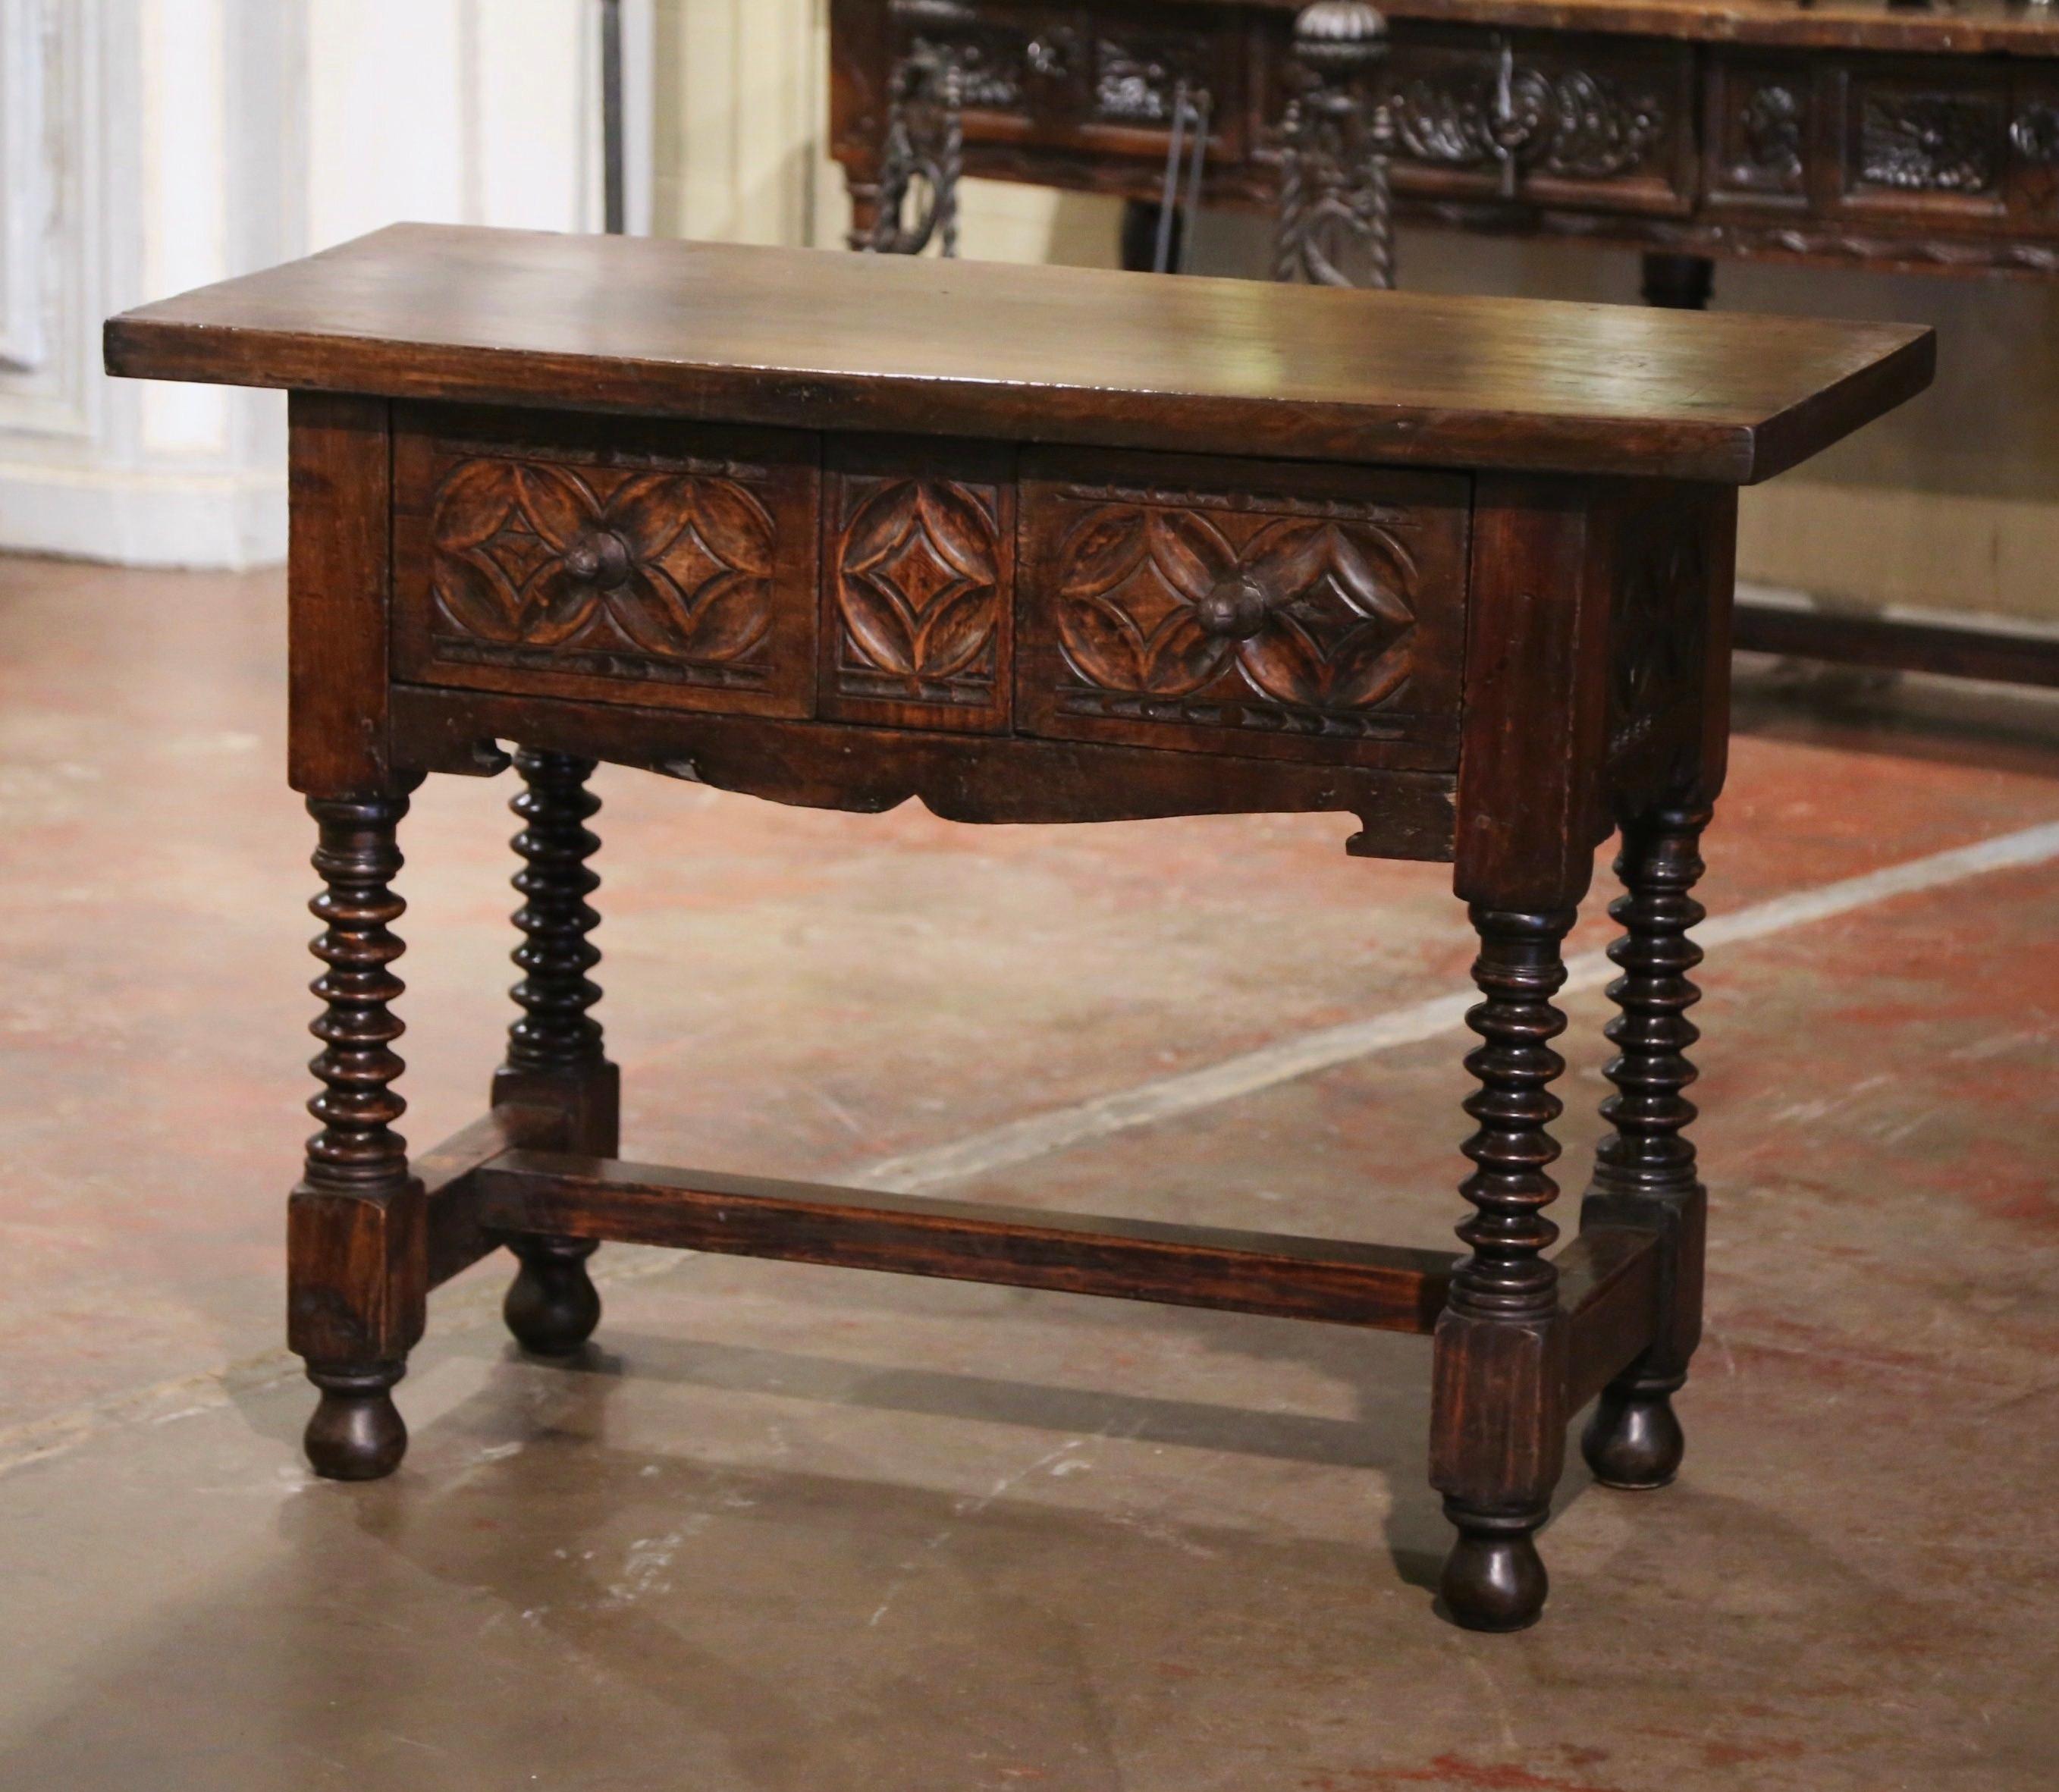 18th Century Spanish Renaissance Carved Walnut Console Table with Drawers In Excellent Condition For Sale In Dallas, TX